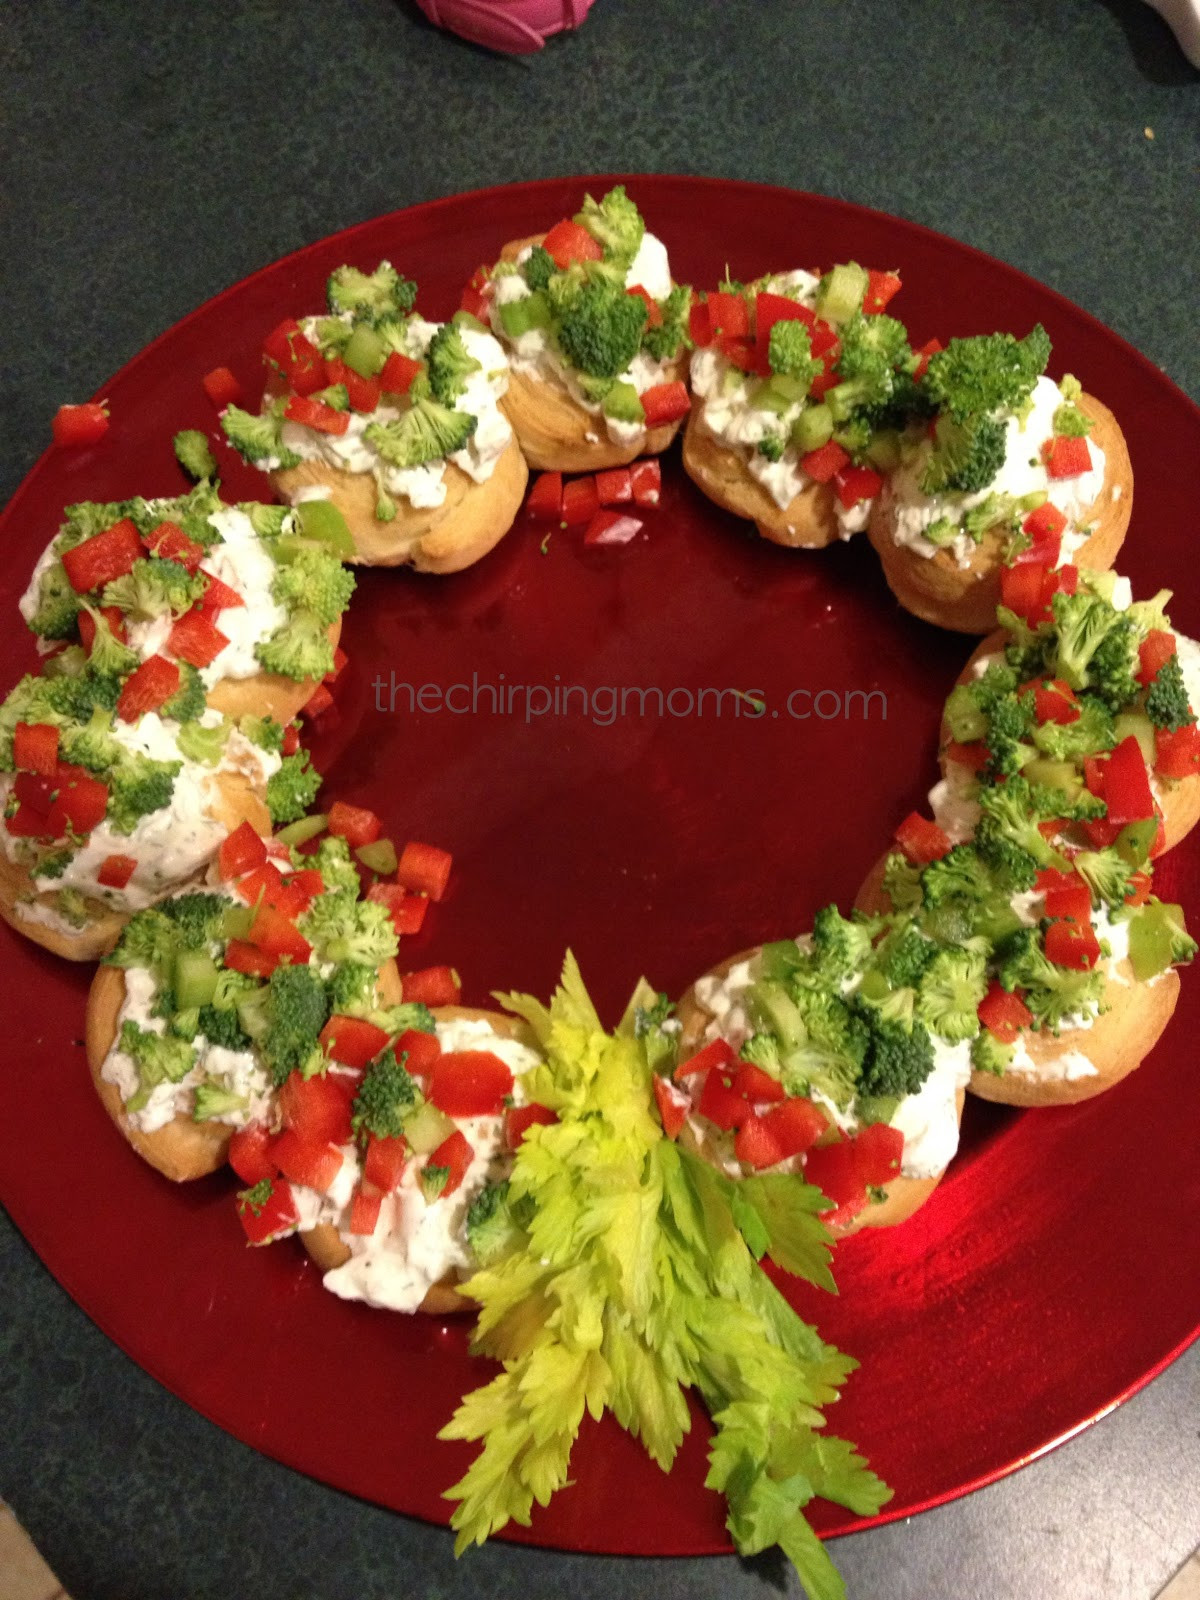 Christmas Party Hors D Oeuvres Ideas
 Festive & Easy Holiday Hors d oeuvres The Chirping Moms